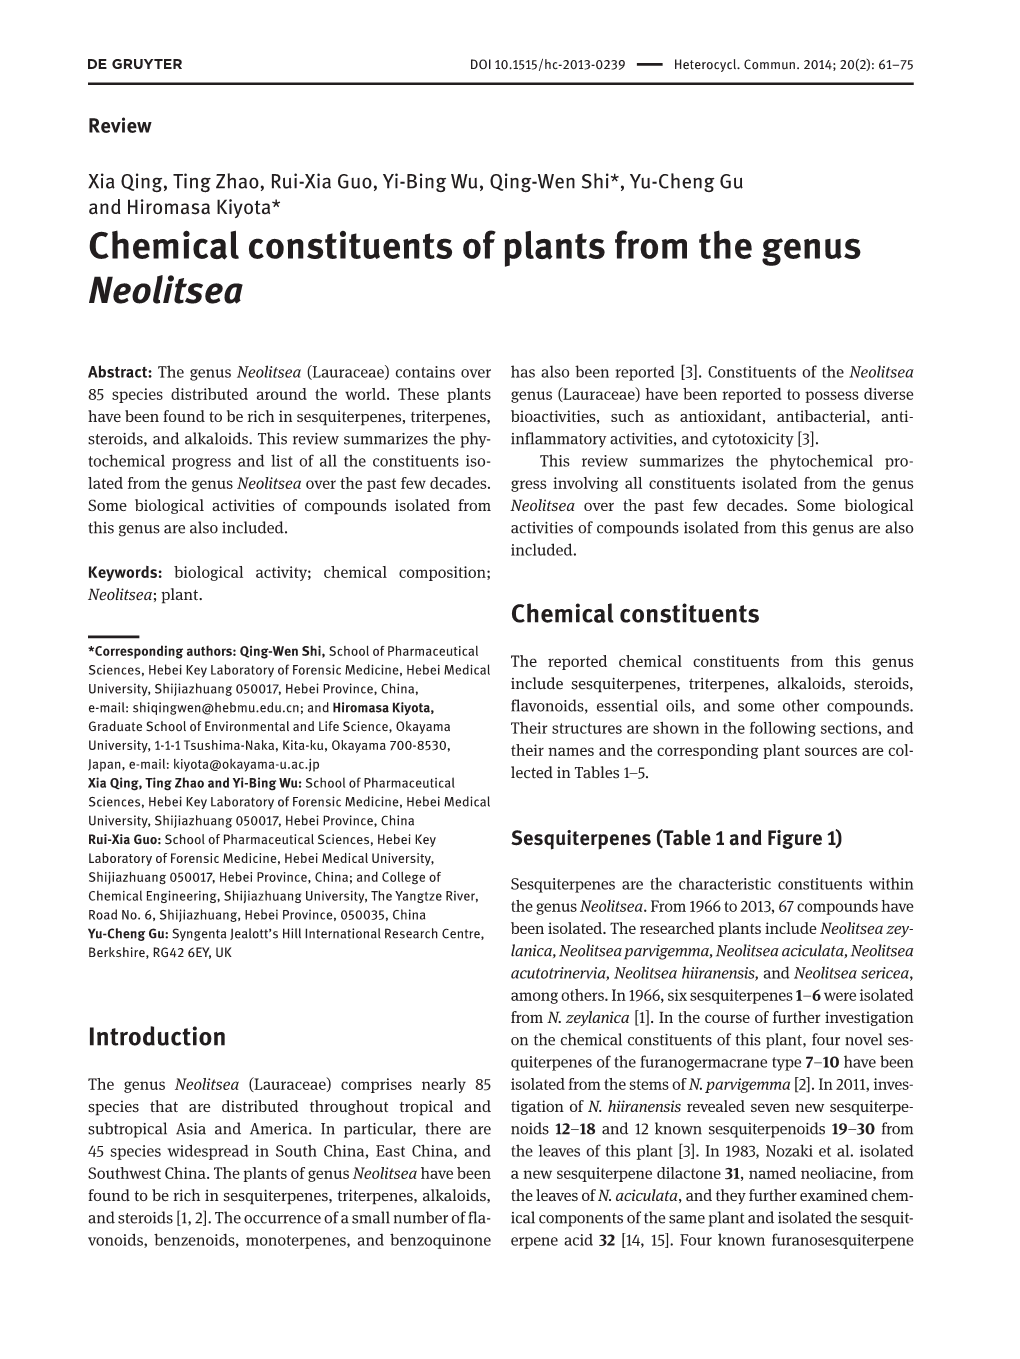 Chemical Constituents of Plants from the Genus Neolitsea